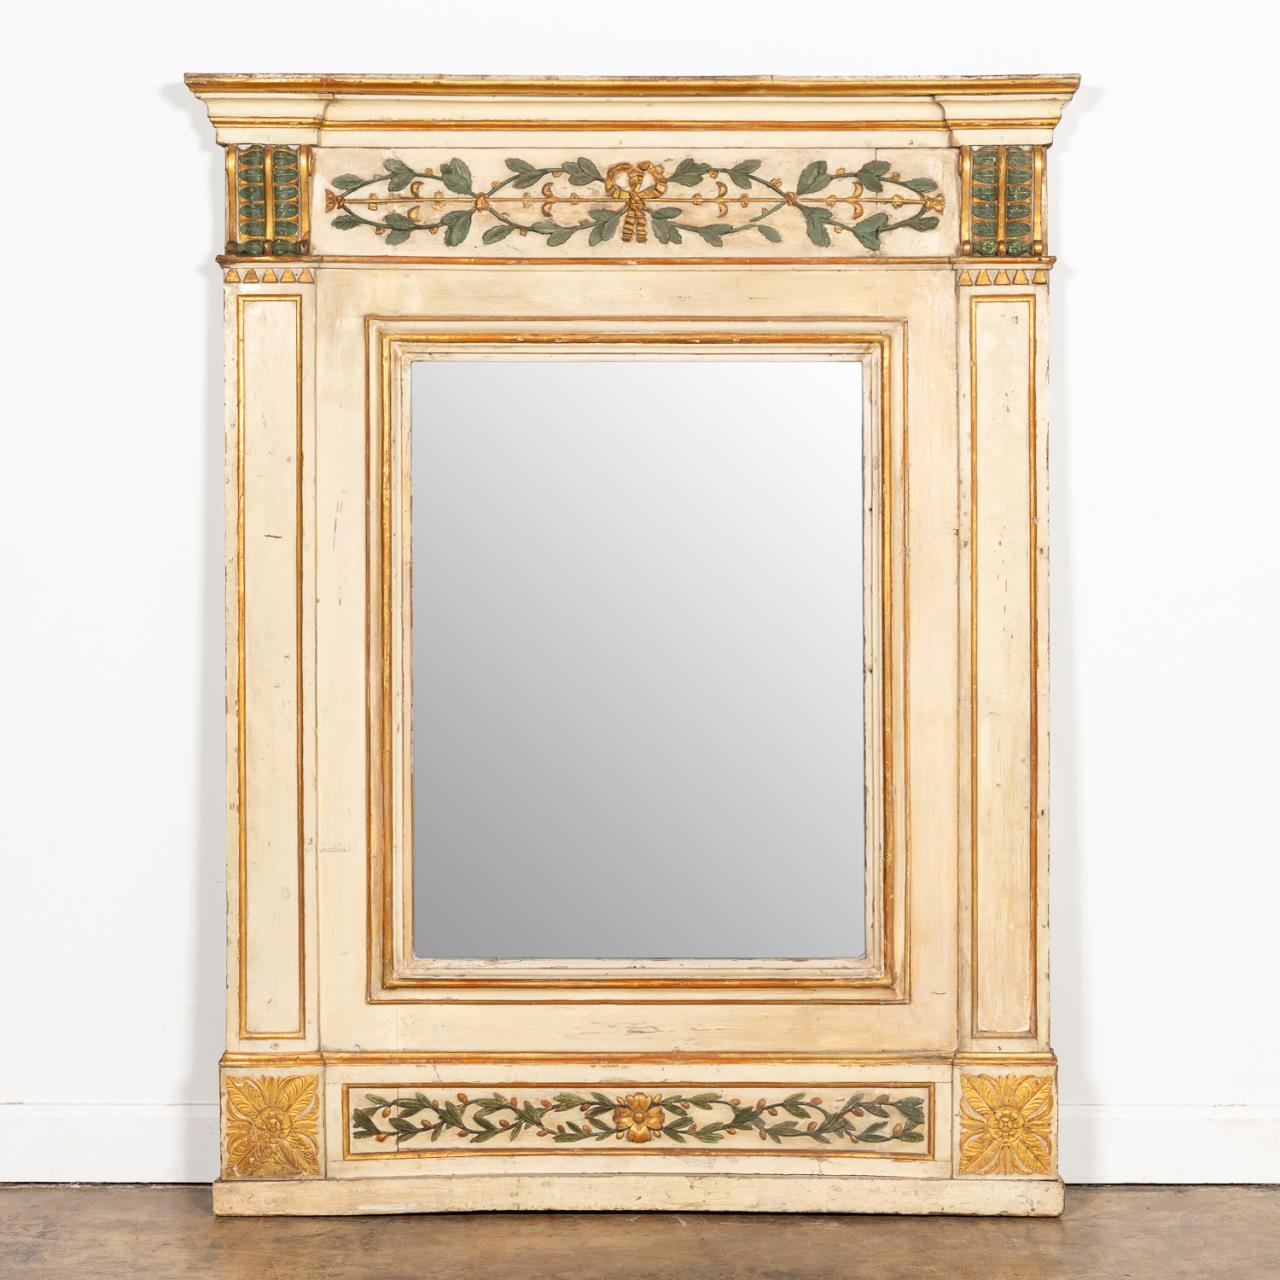 ITALIAN NEOCLASSICAL PAINTED OVERMANTEL 35a32f